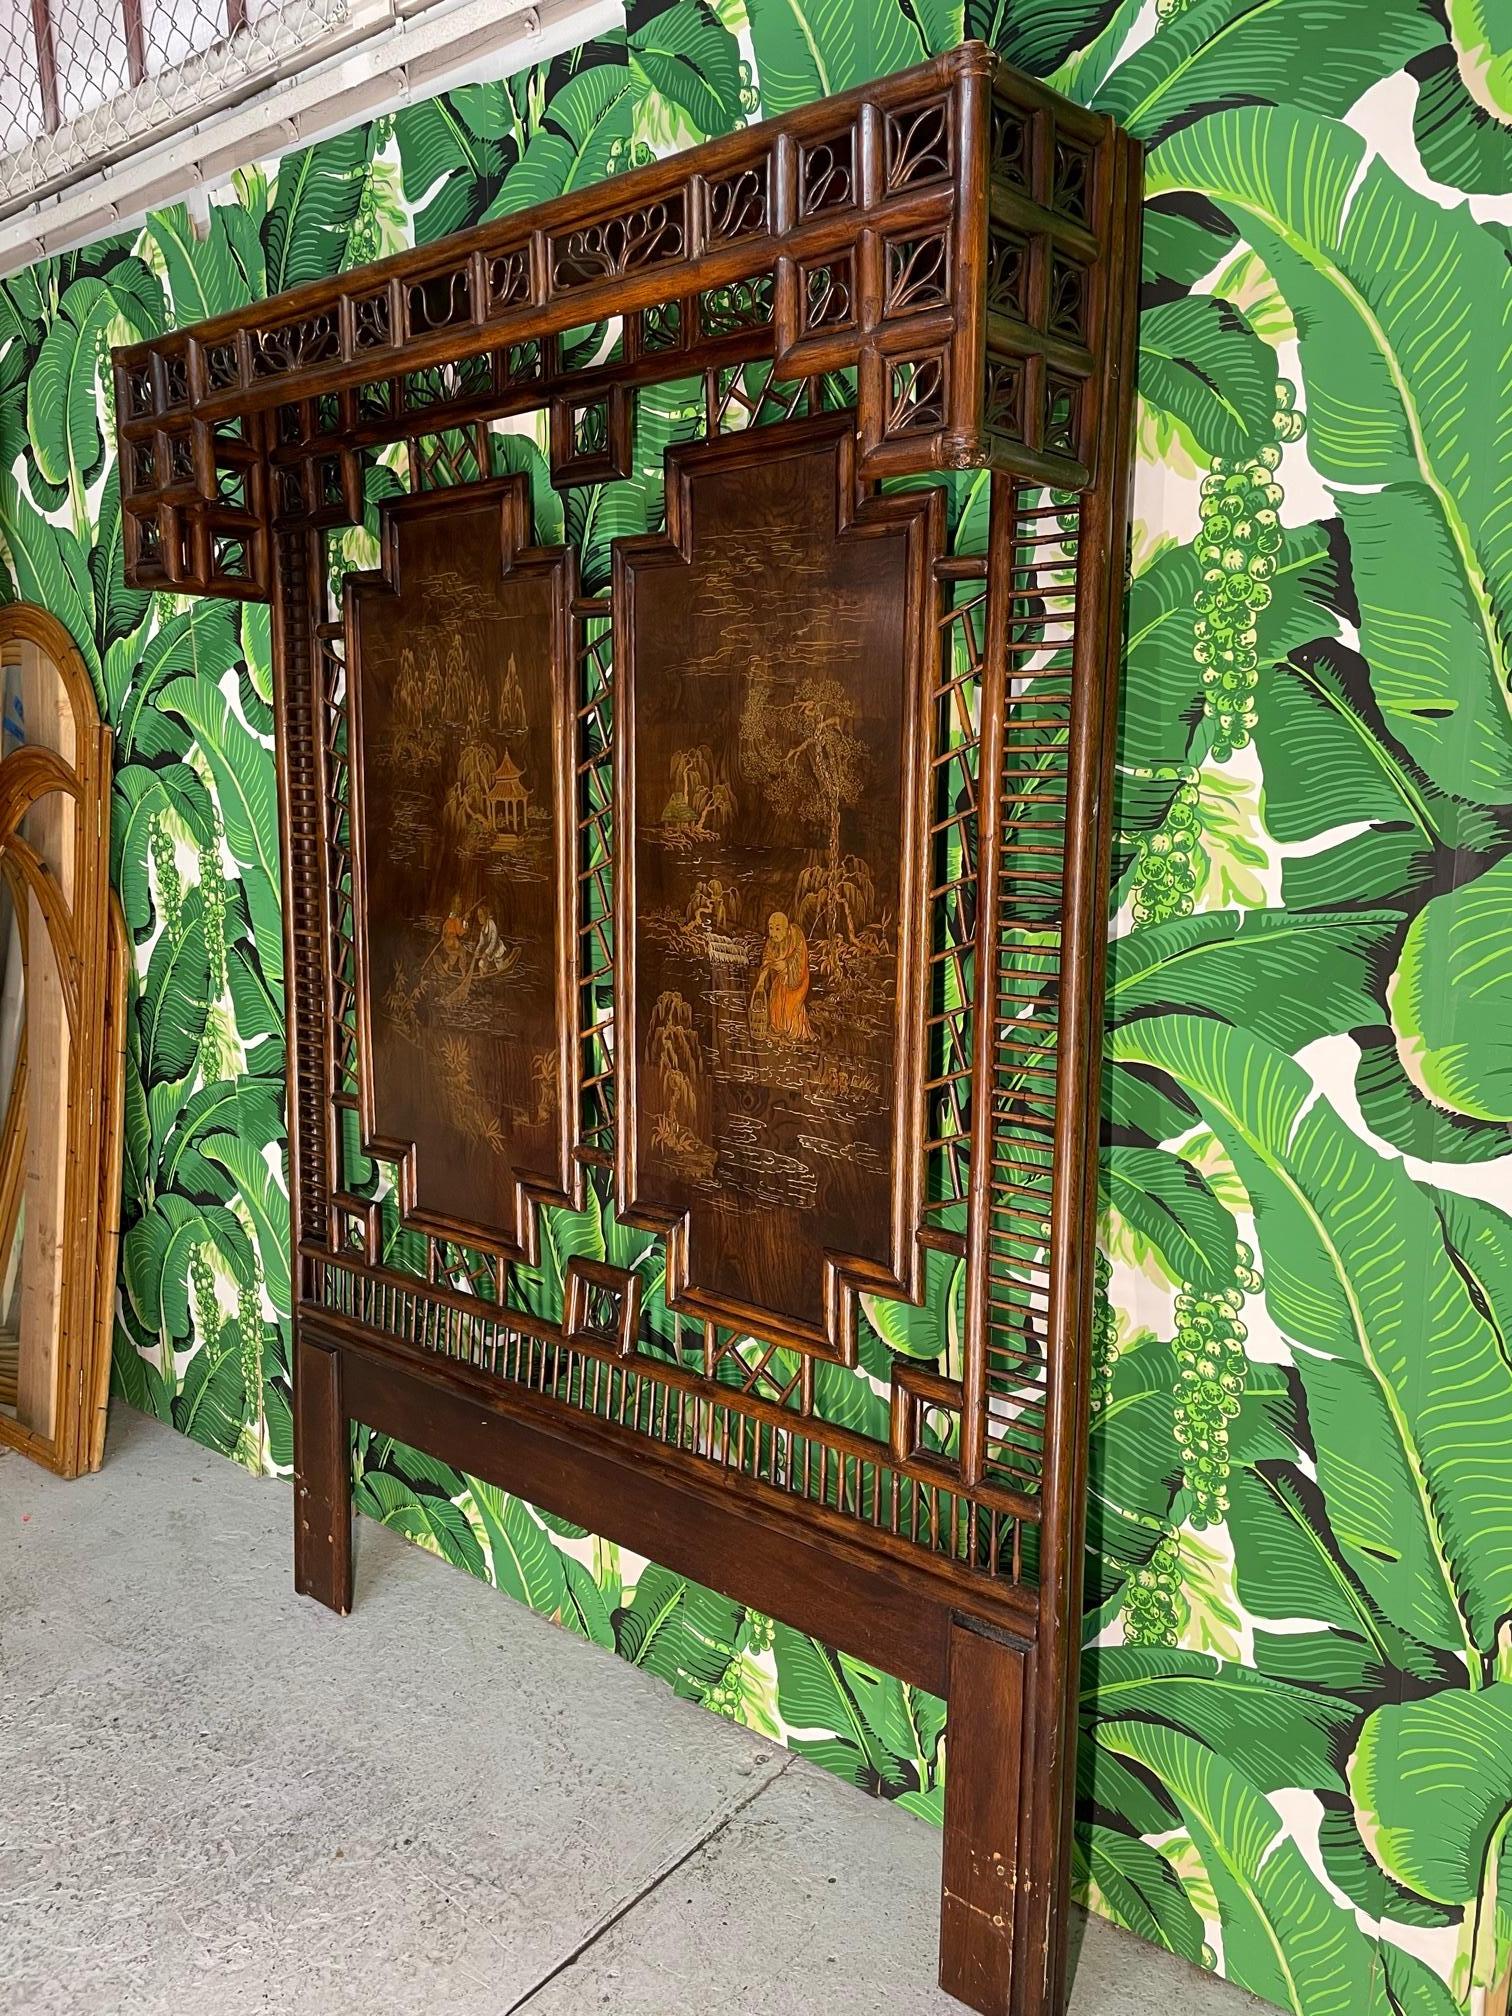 Large canopy headboard by Henredon features rattan construction and Chinese artwork. Queen size. Very good condition with only very minor imperfections consistent with age.